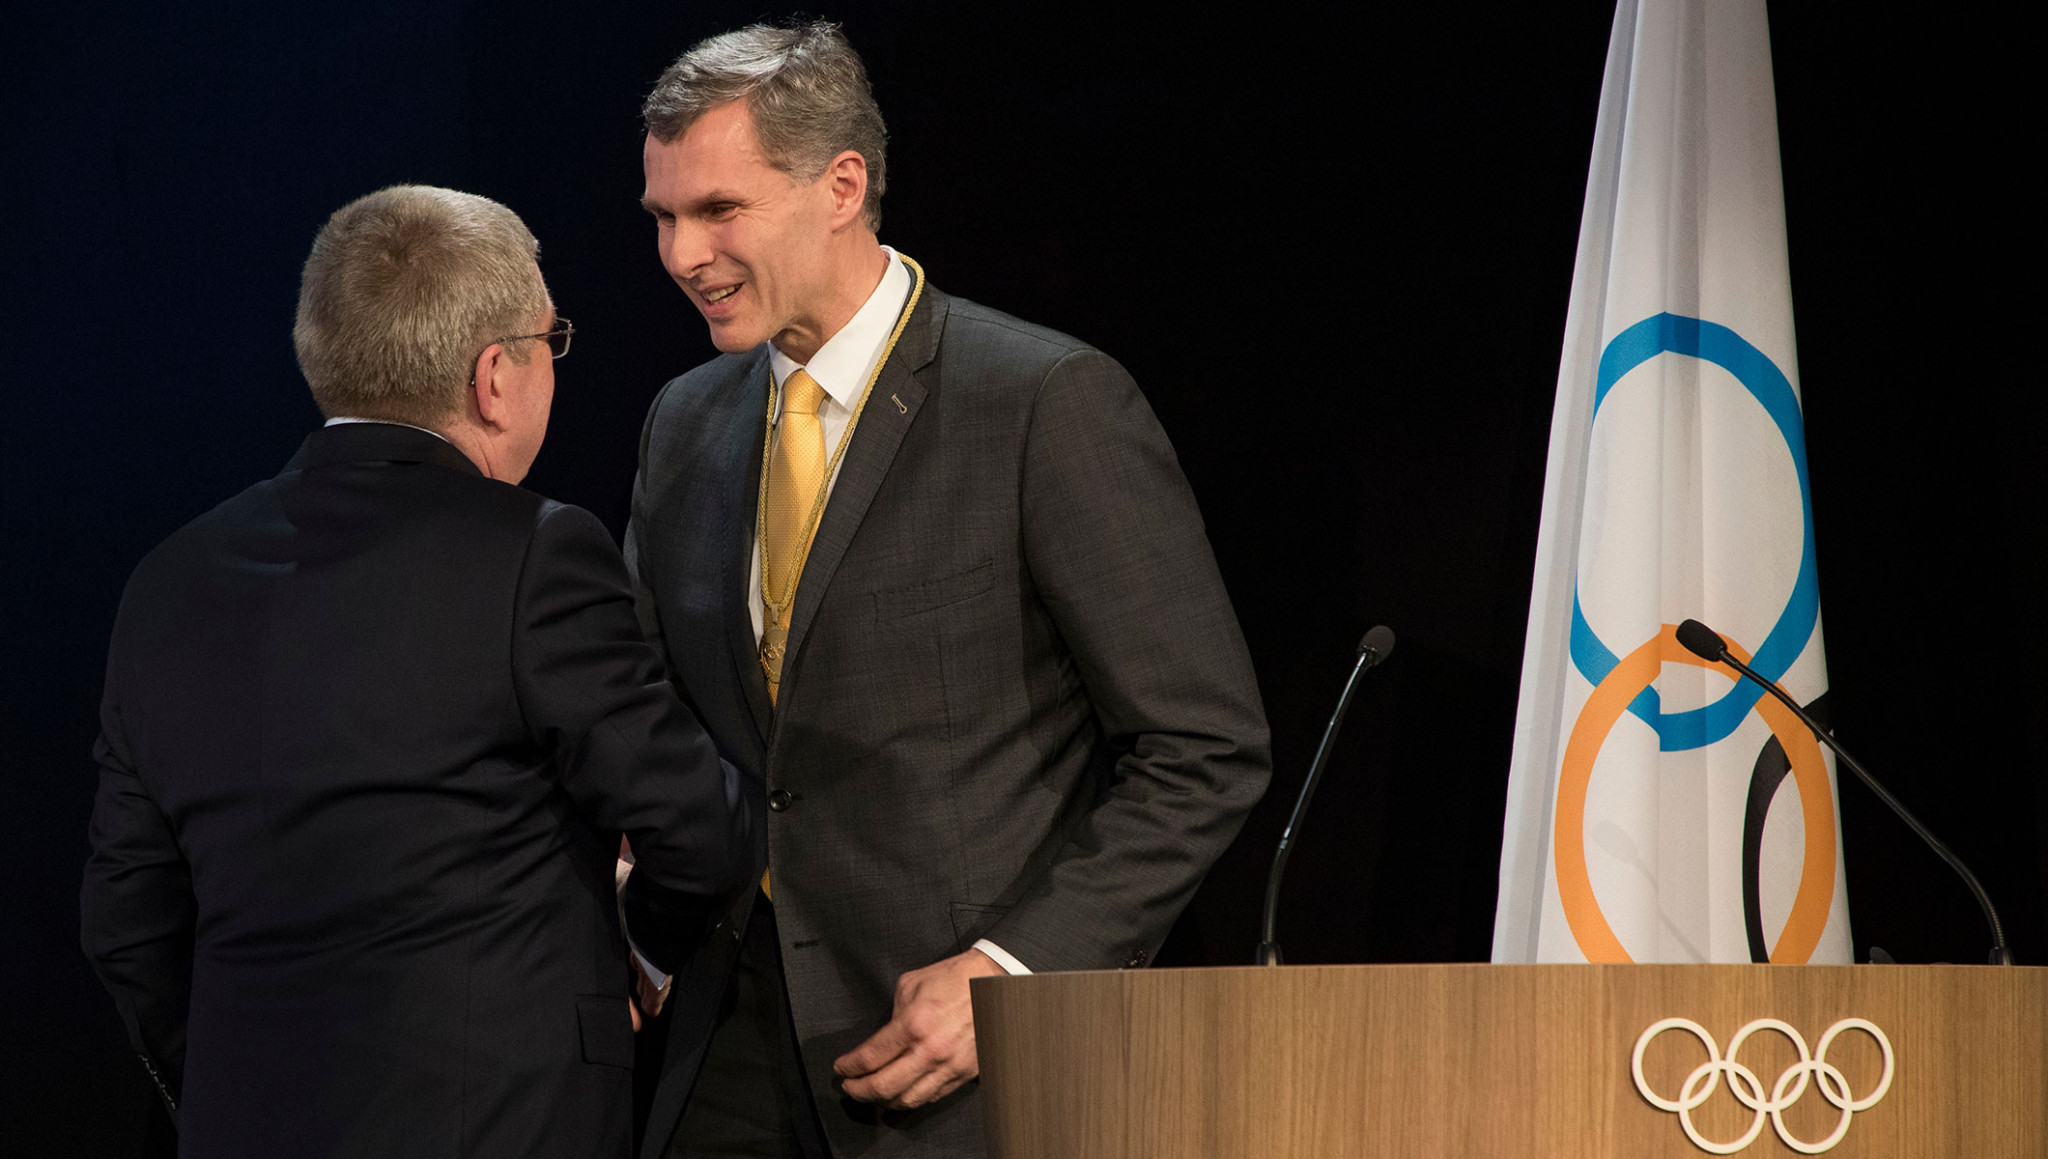 Jiří Kejval was elected as an IOC member during the Session today ©IOC/Flickr